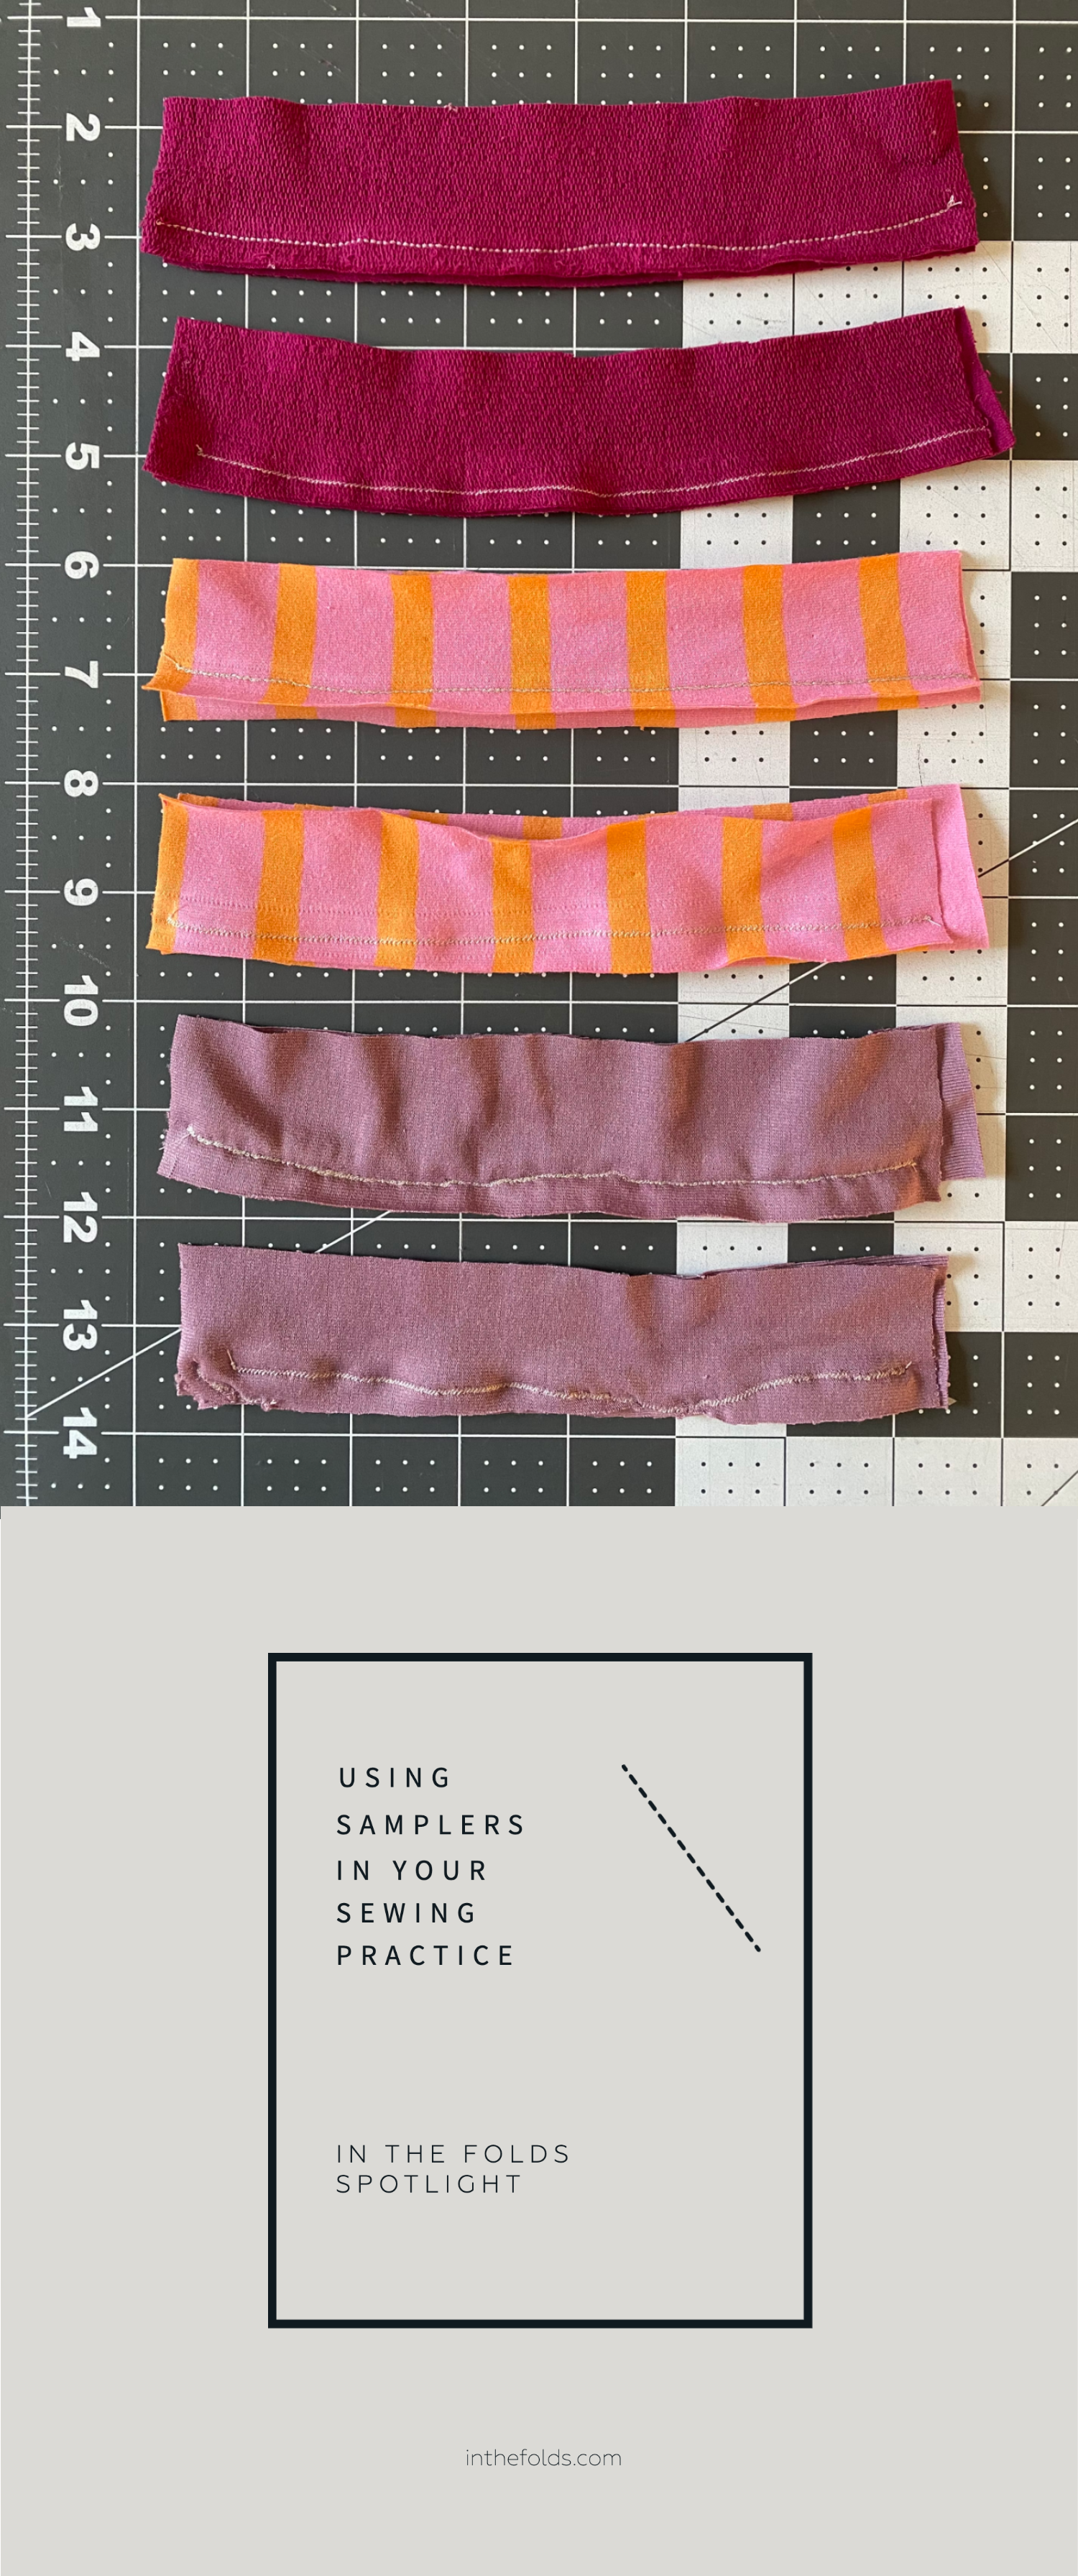 6 Methods For Sewing Zippers - The Creative Curator